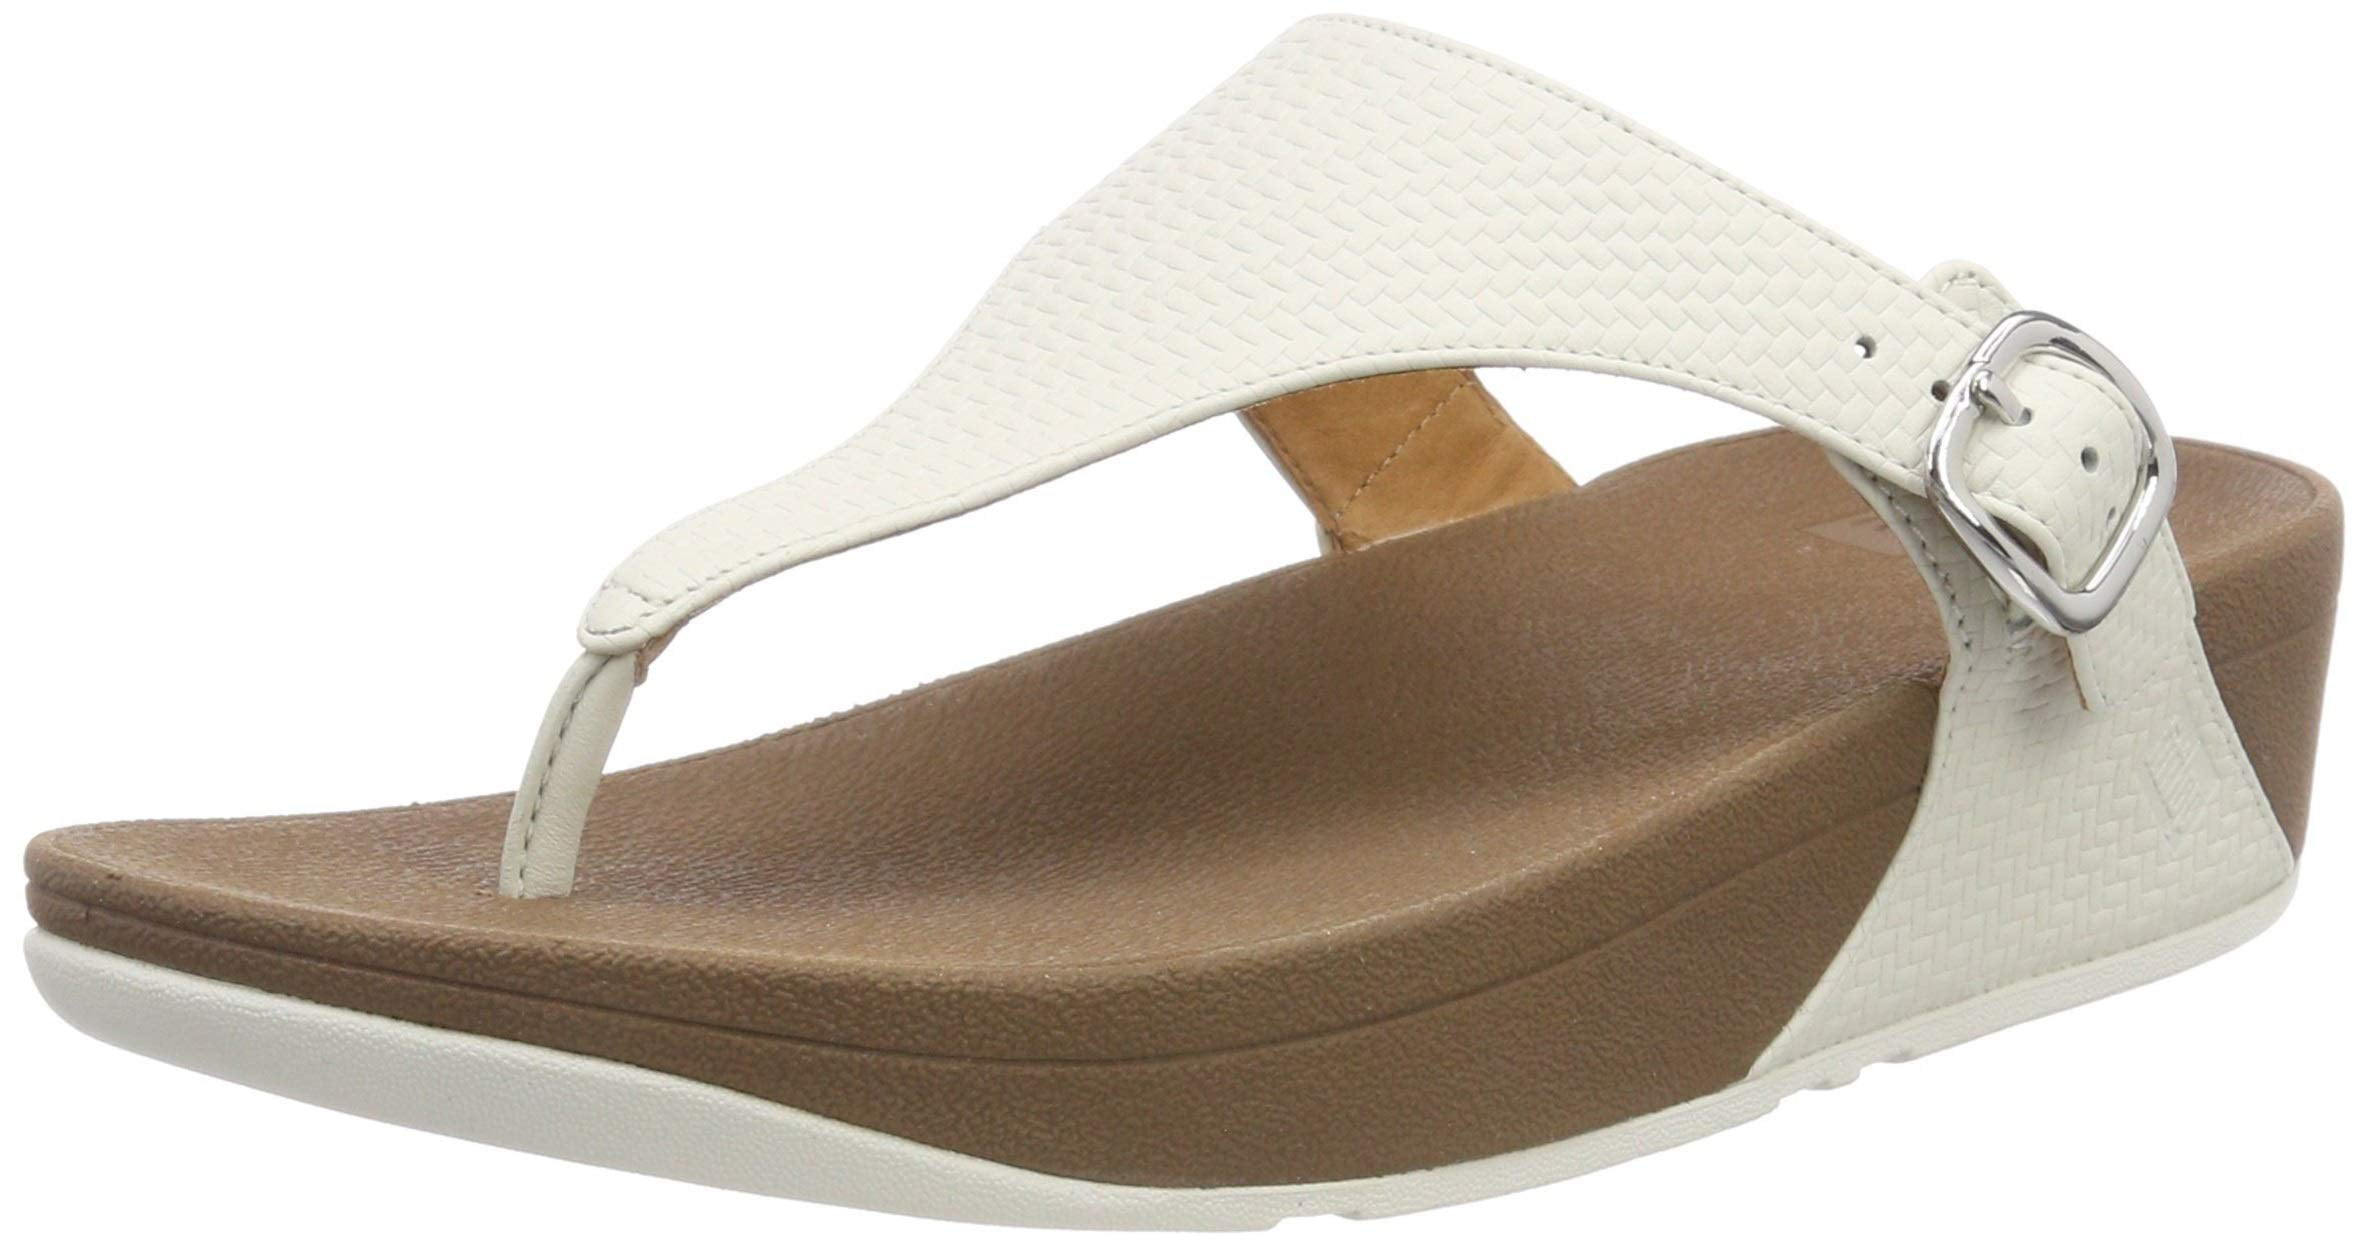 FitFlop - Fitflop The Skinny Sandals Urban White - Walmart.com ...